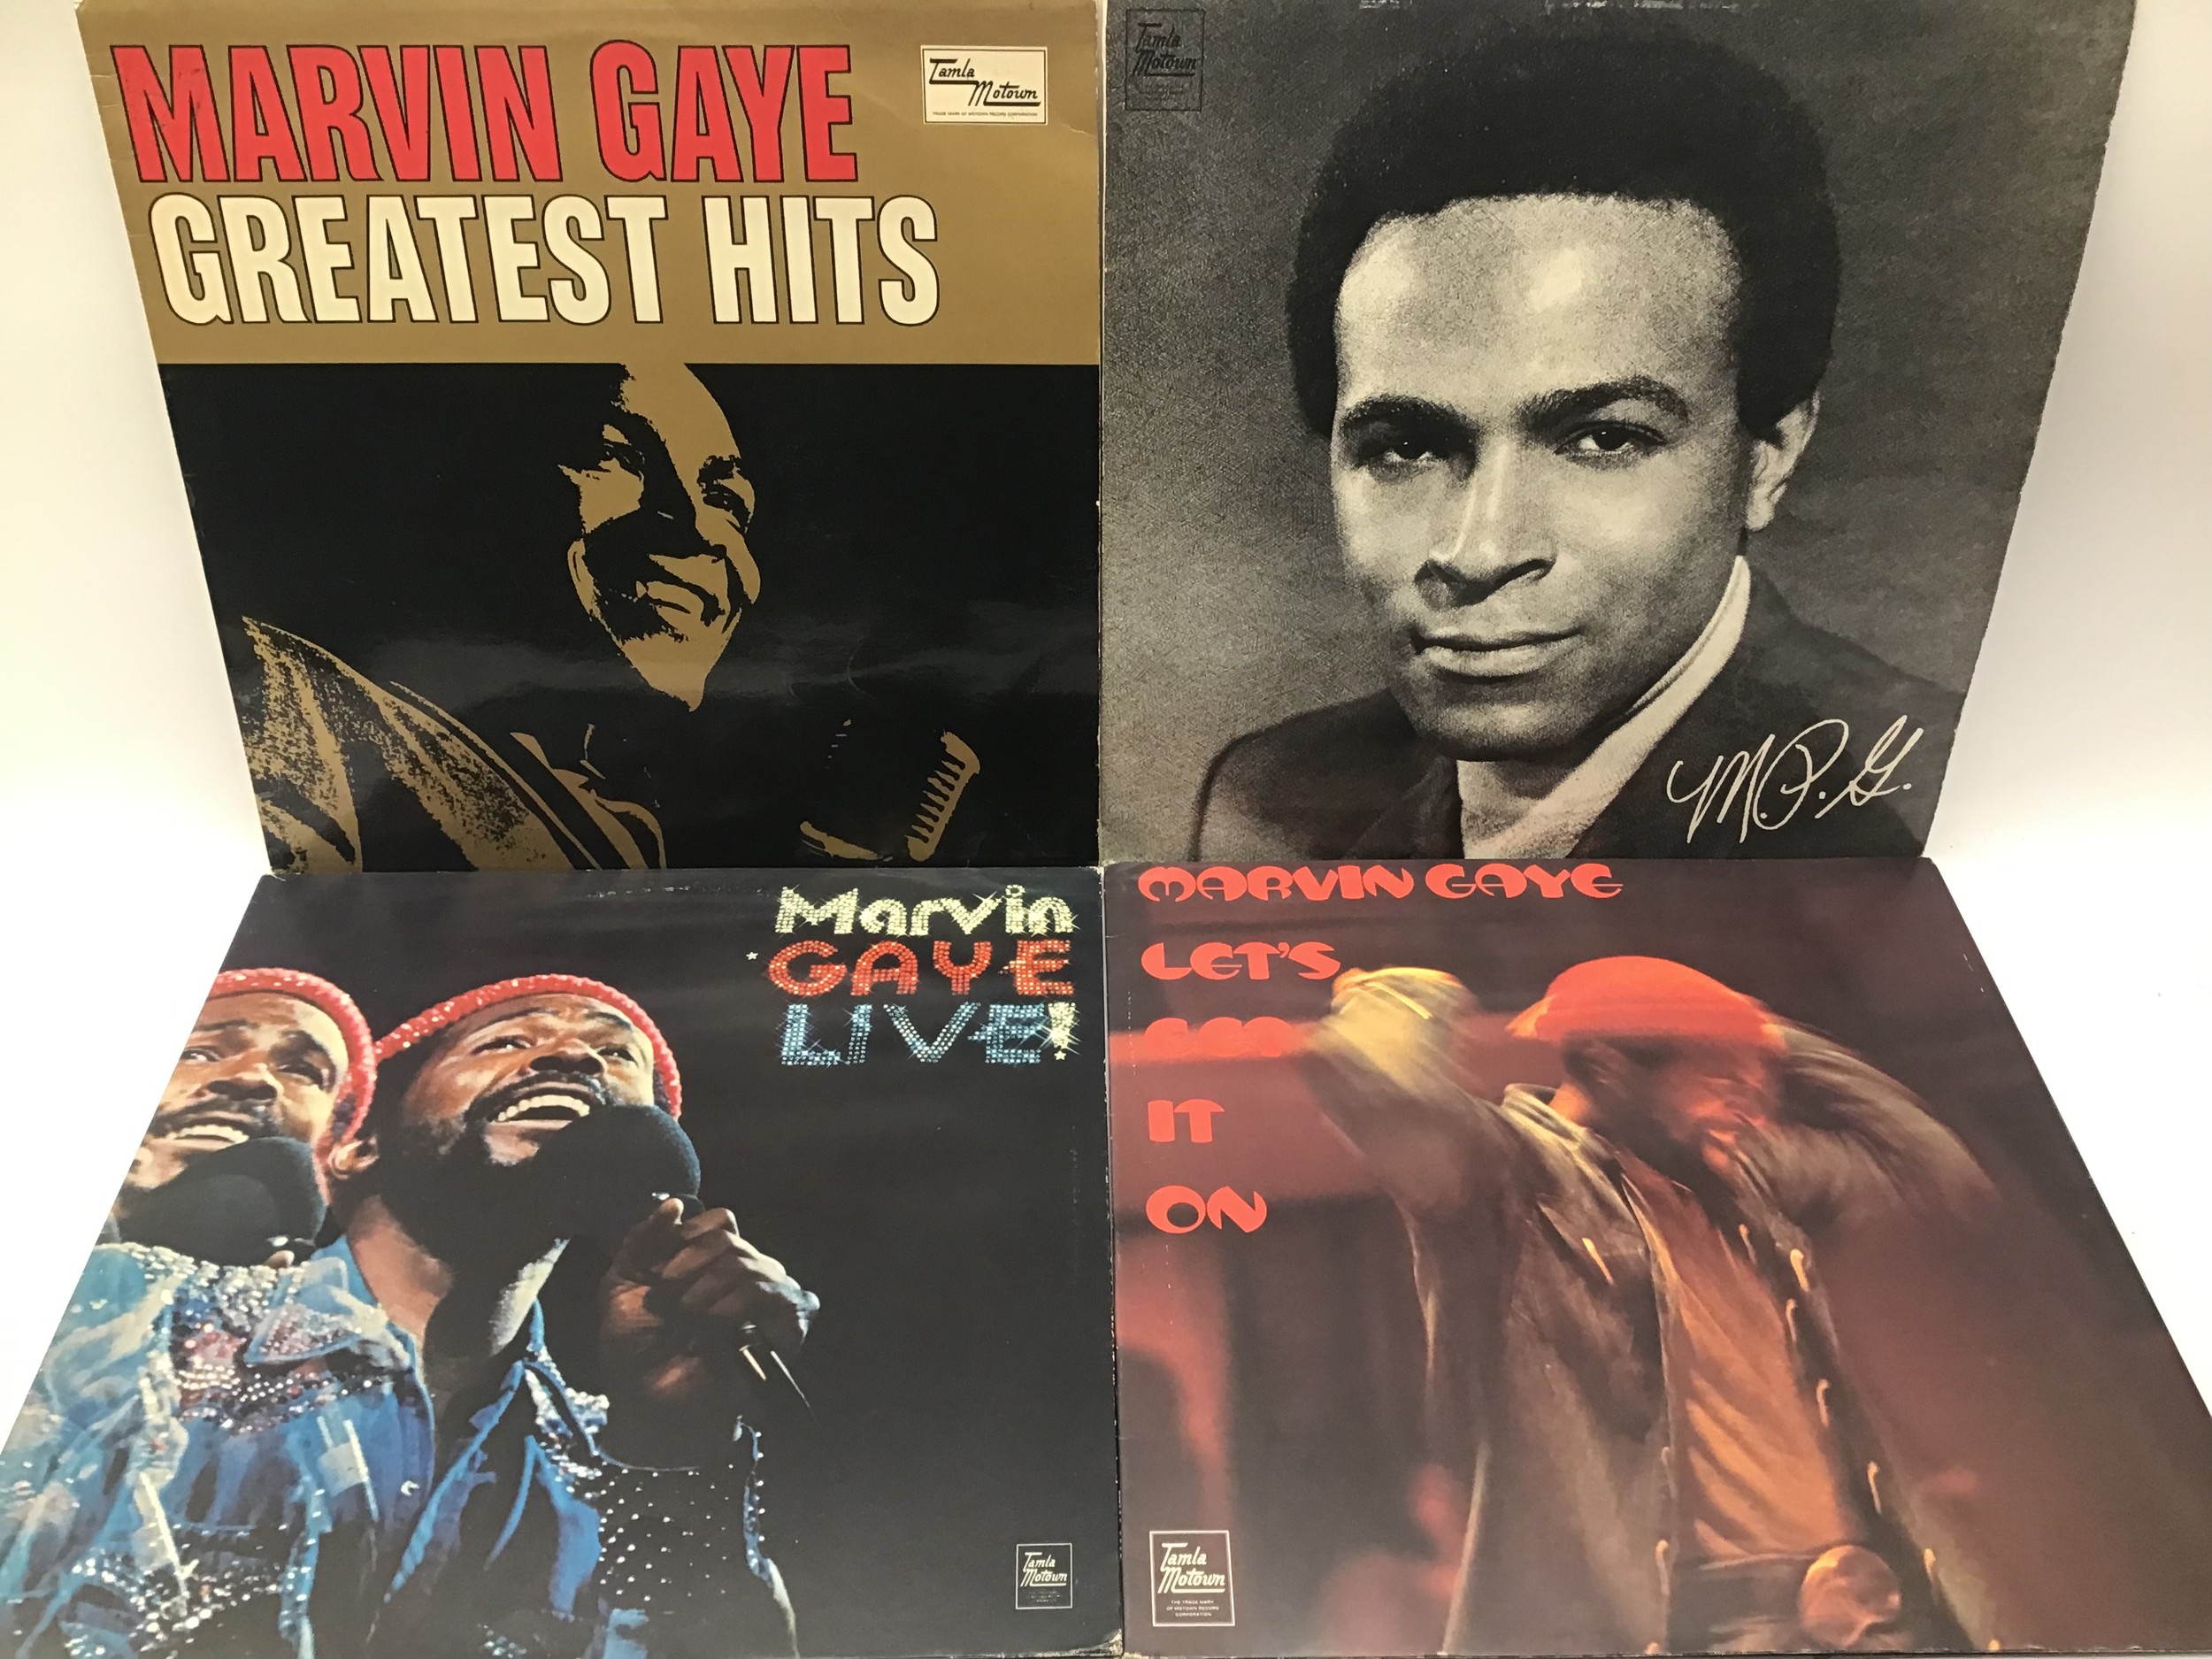 4 VINYL ALBUMS FROM MARVIN GAYE. Titles here include - Greatest Hits - Live - Let’s Get It On and